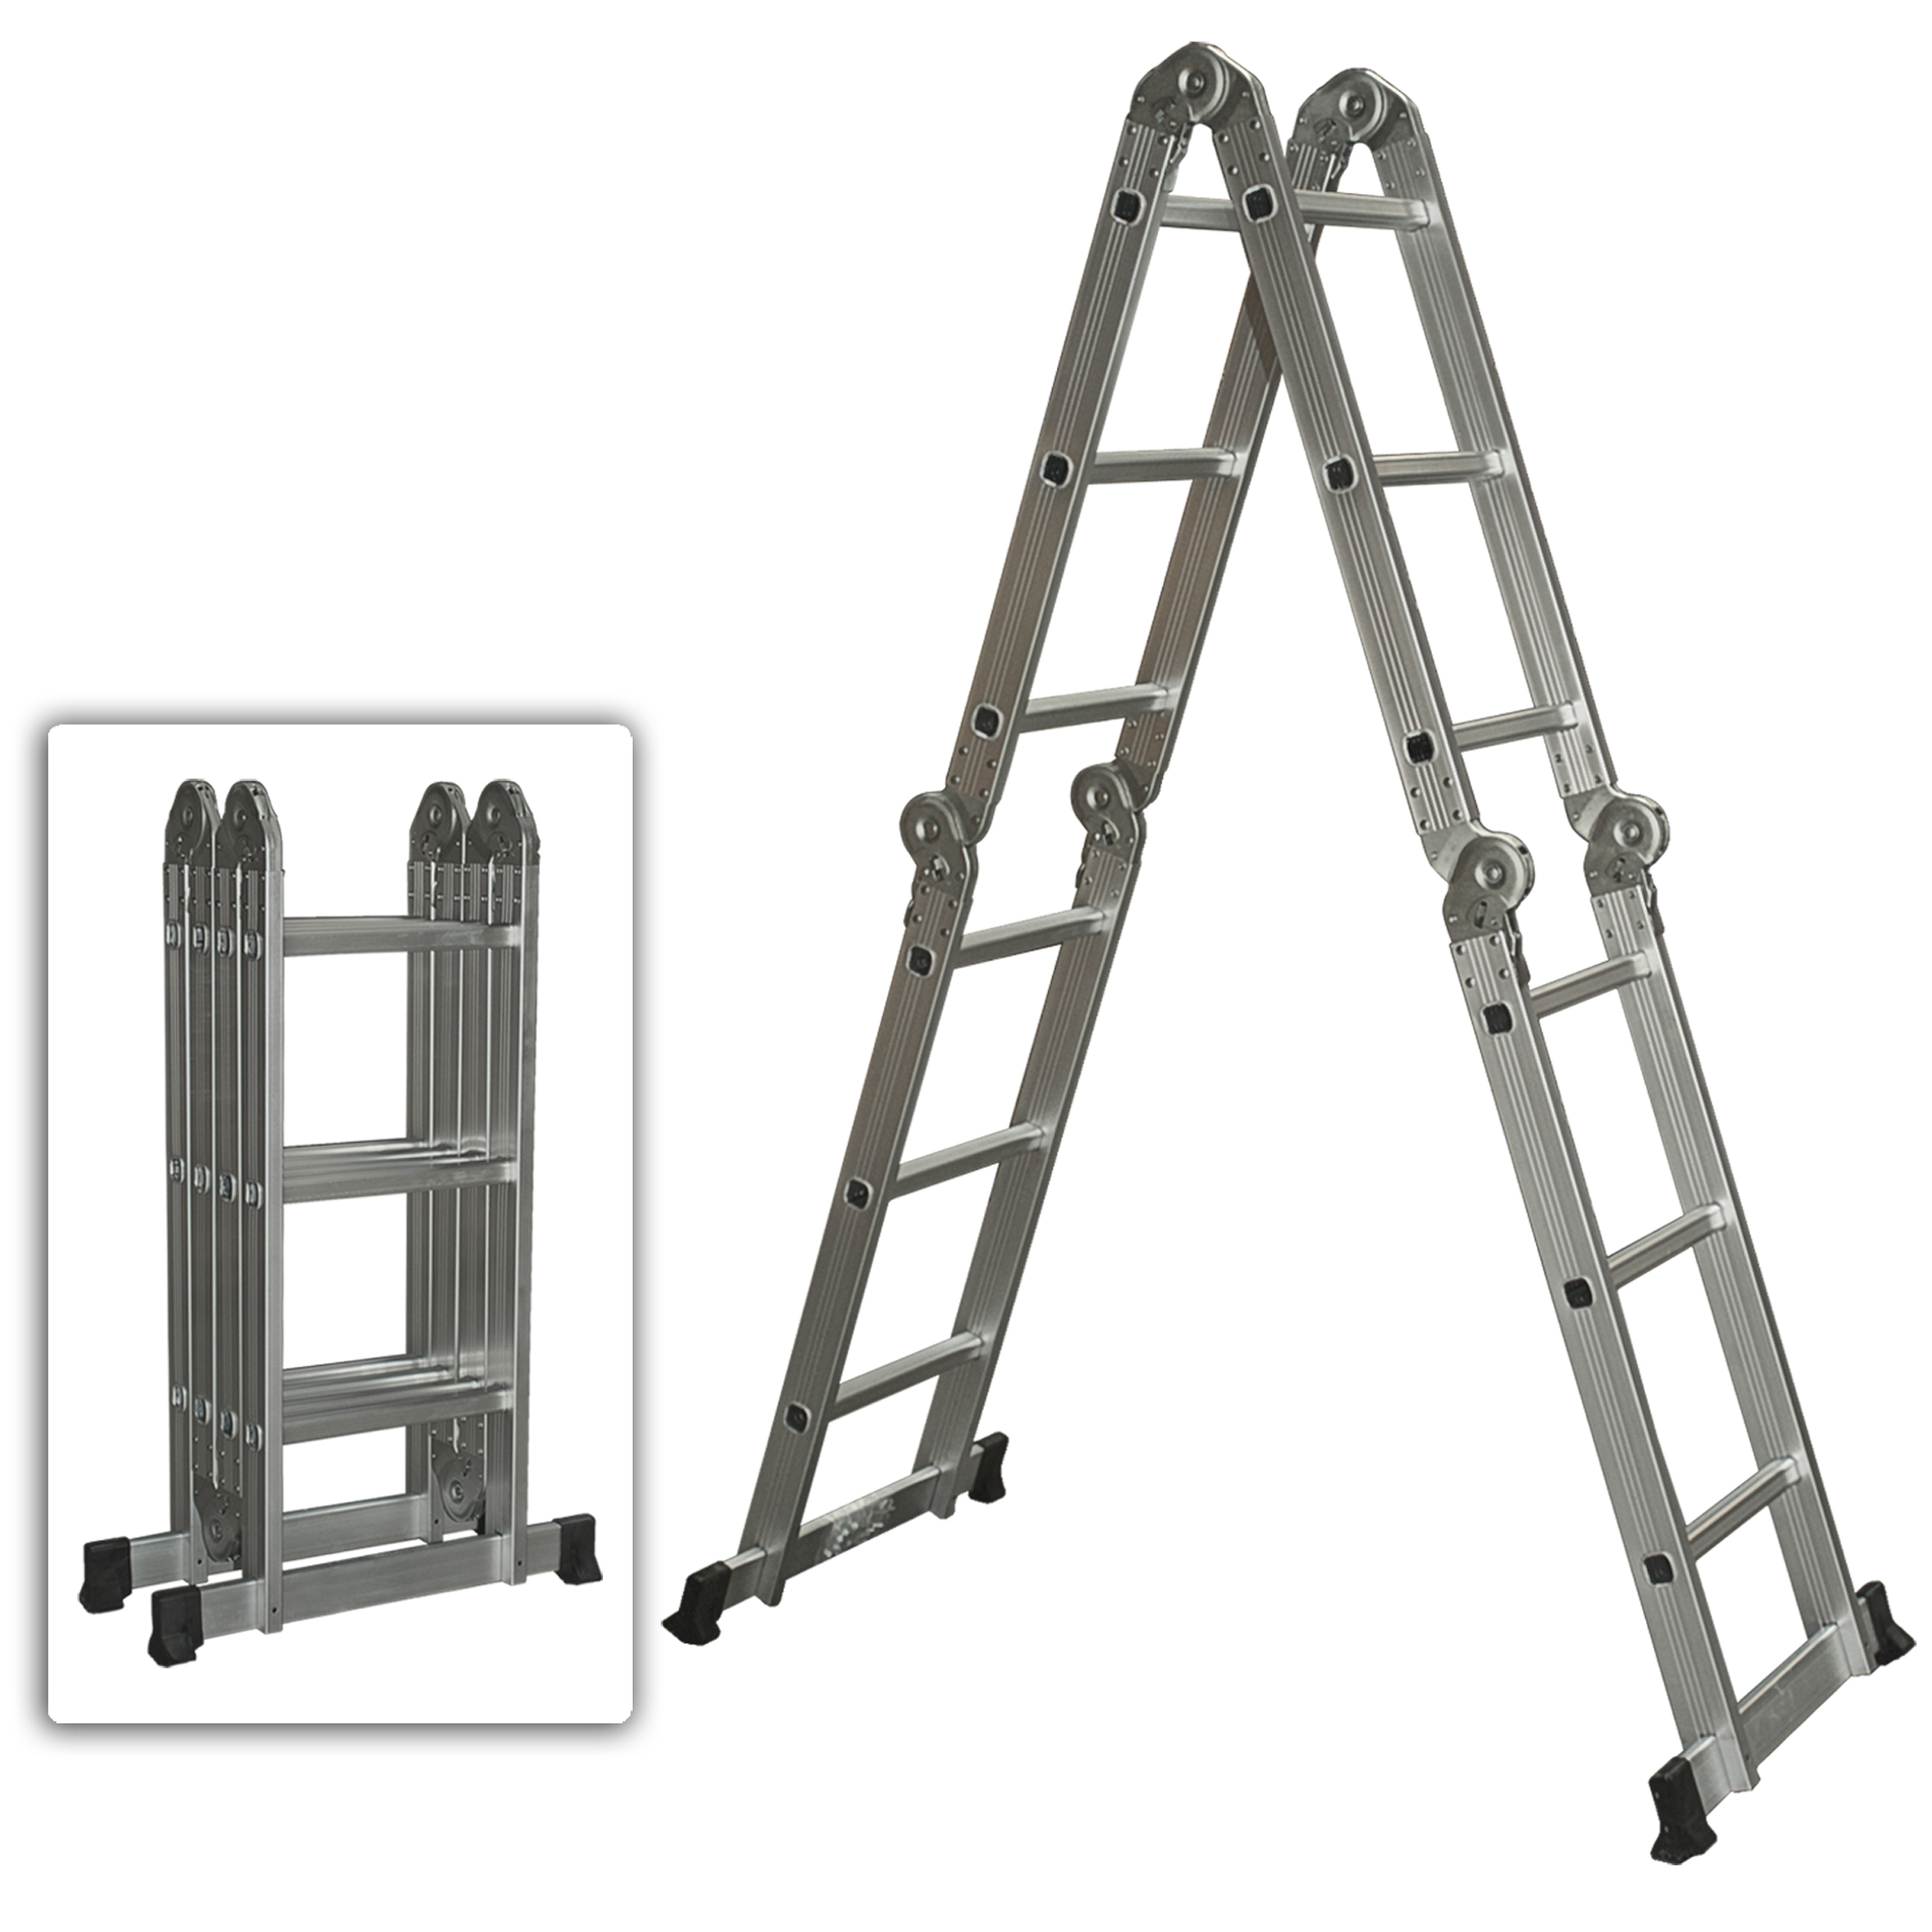 Folding ladders for sale